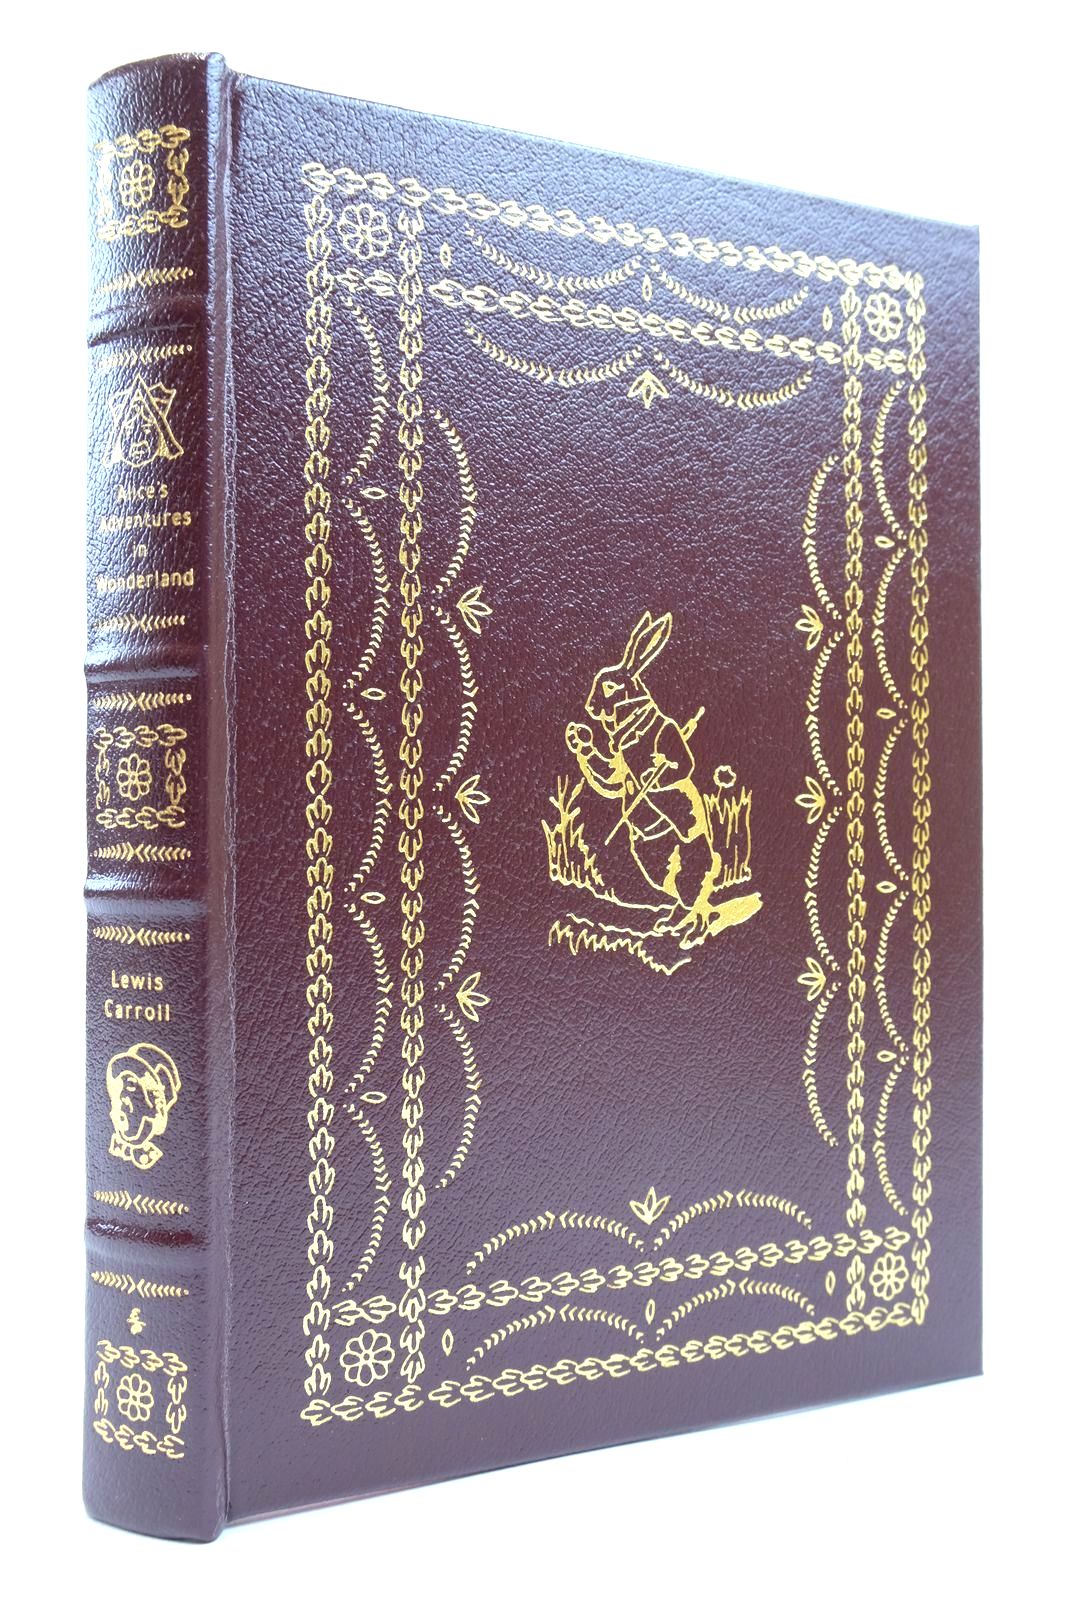 Photo of ALICE'S ADVENTURES IN WONDERLAND written by Carroll, Lewis illustrated by Tenniel, John published by Easton Press (STOCK CODE: 2139995)  for sale by Stella & Rose's Books